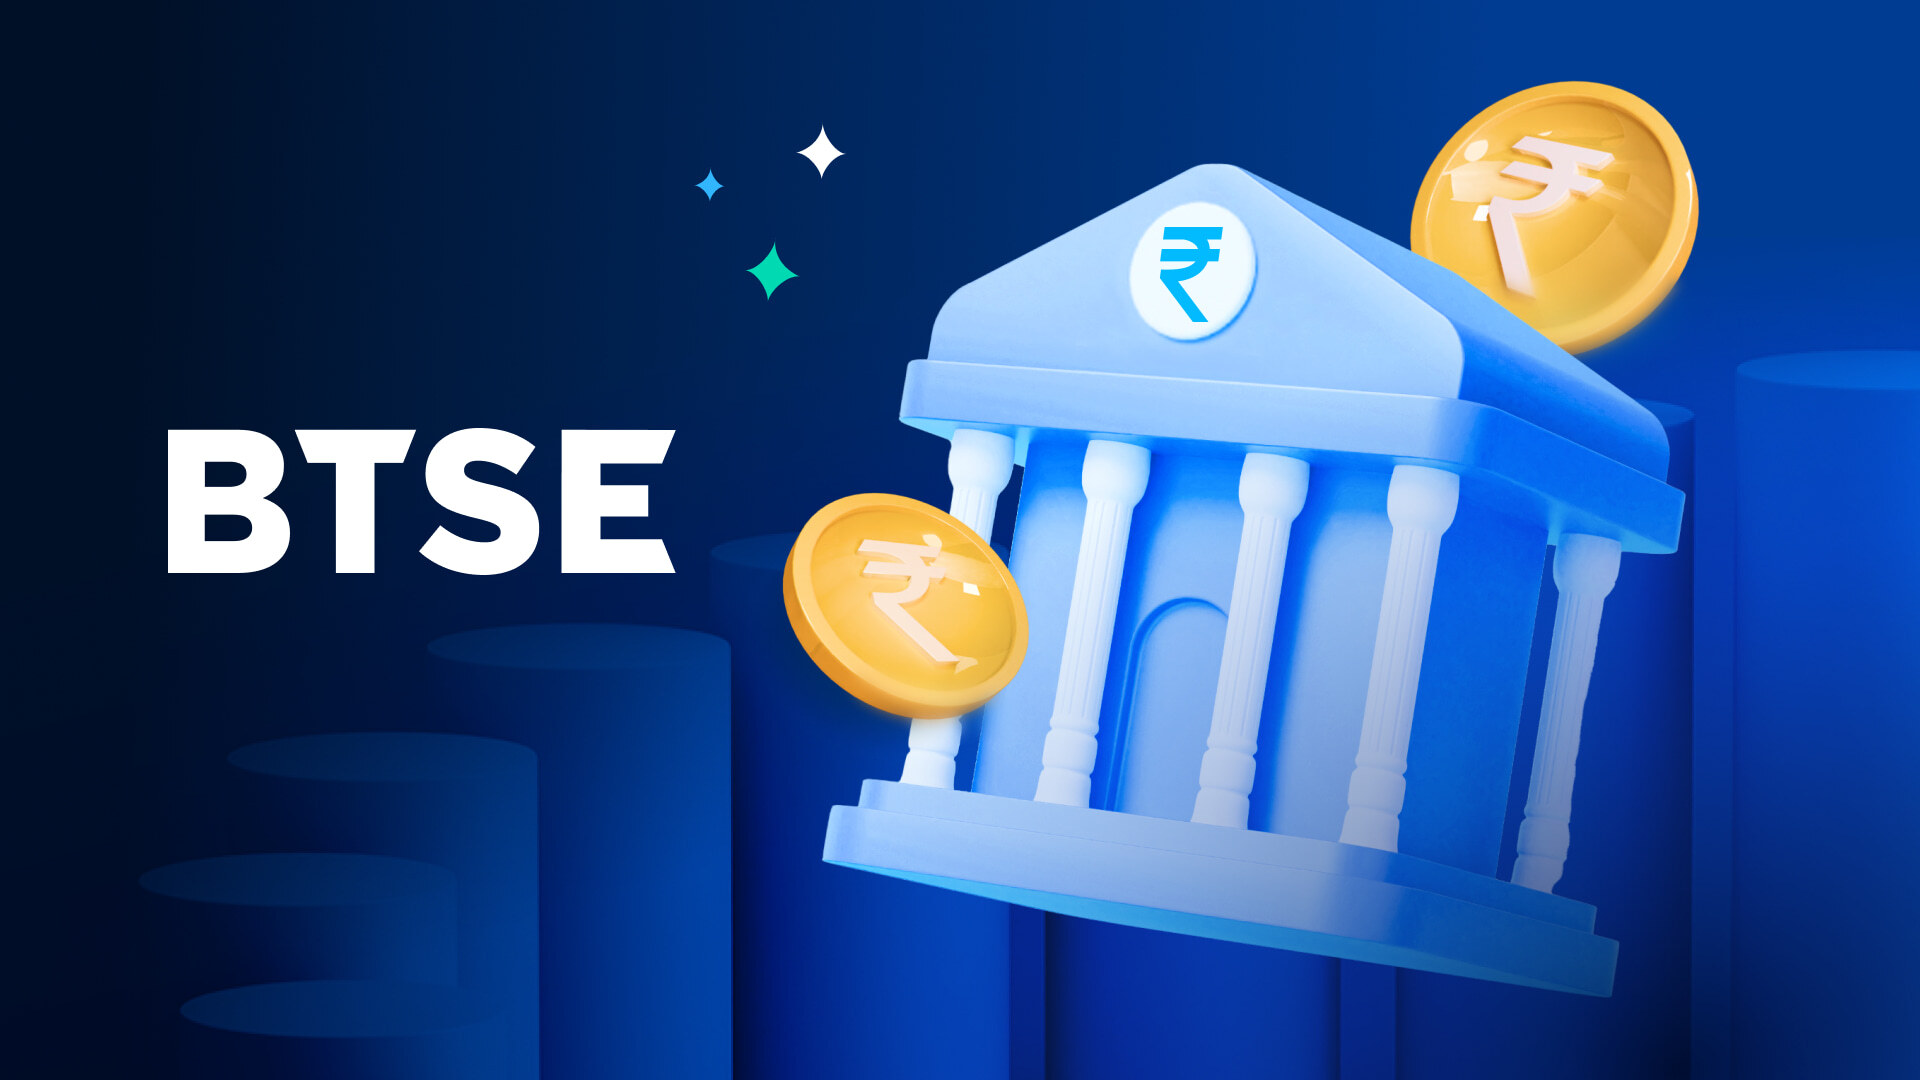 BTSE Announces Support for the Indian Rupee, Strengthens User Access with Crypto On/Off Ramp Services